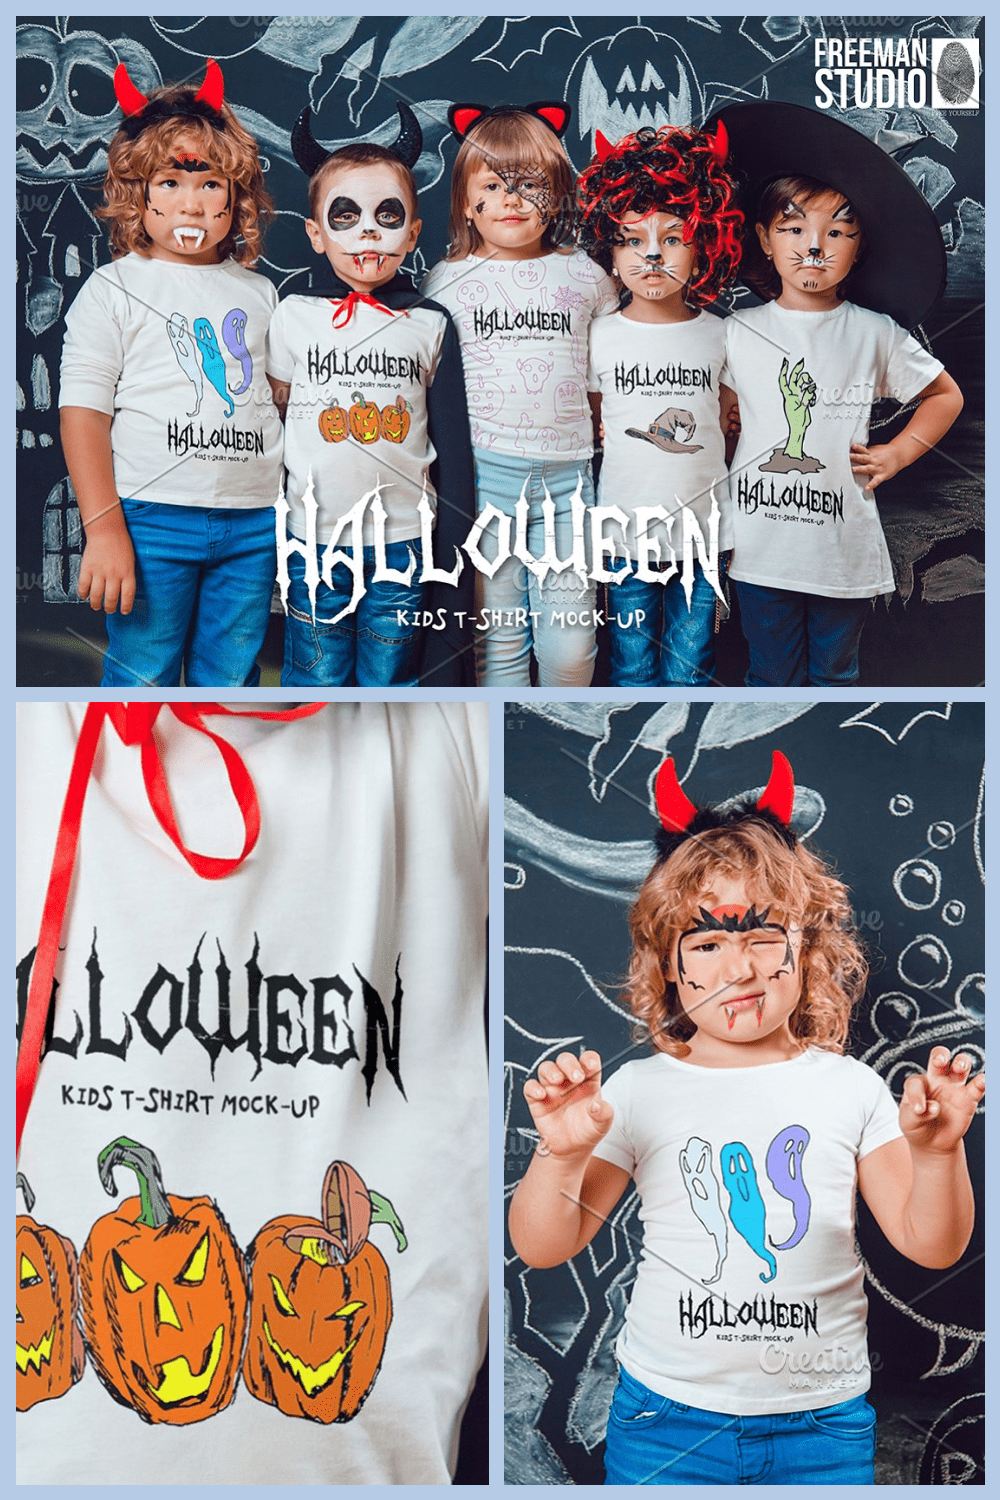 Such a variety of t-shirts that will keep your kids happy during Halloween.